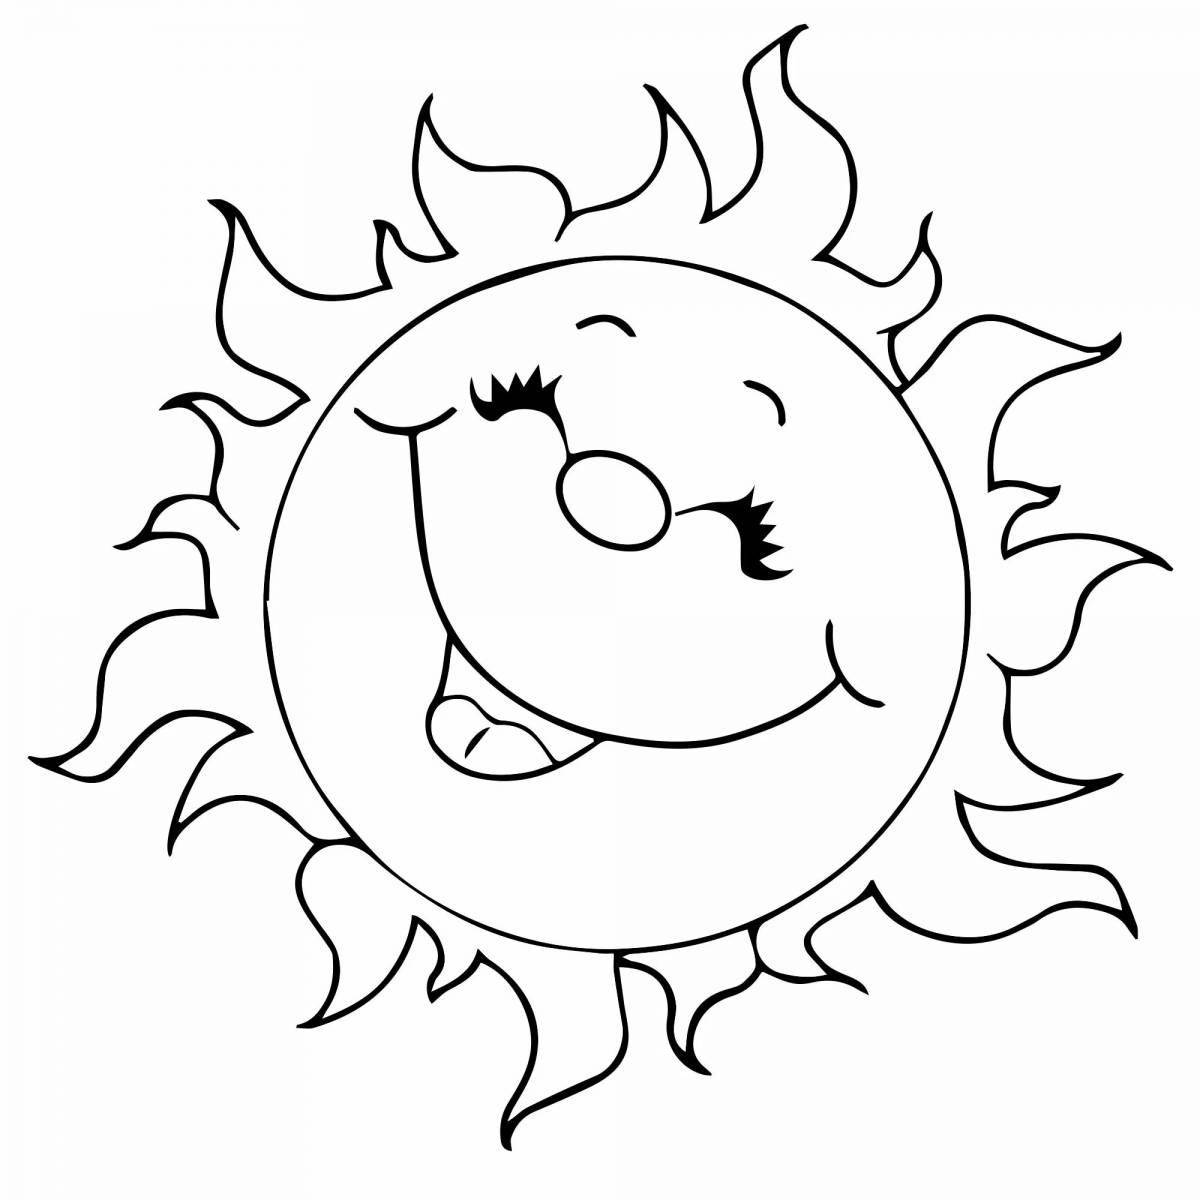 Bright coloring sun for children 3-4 years old